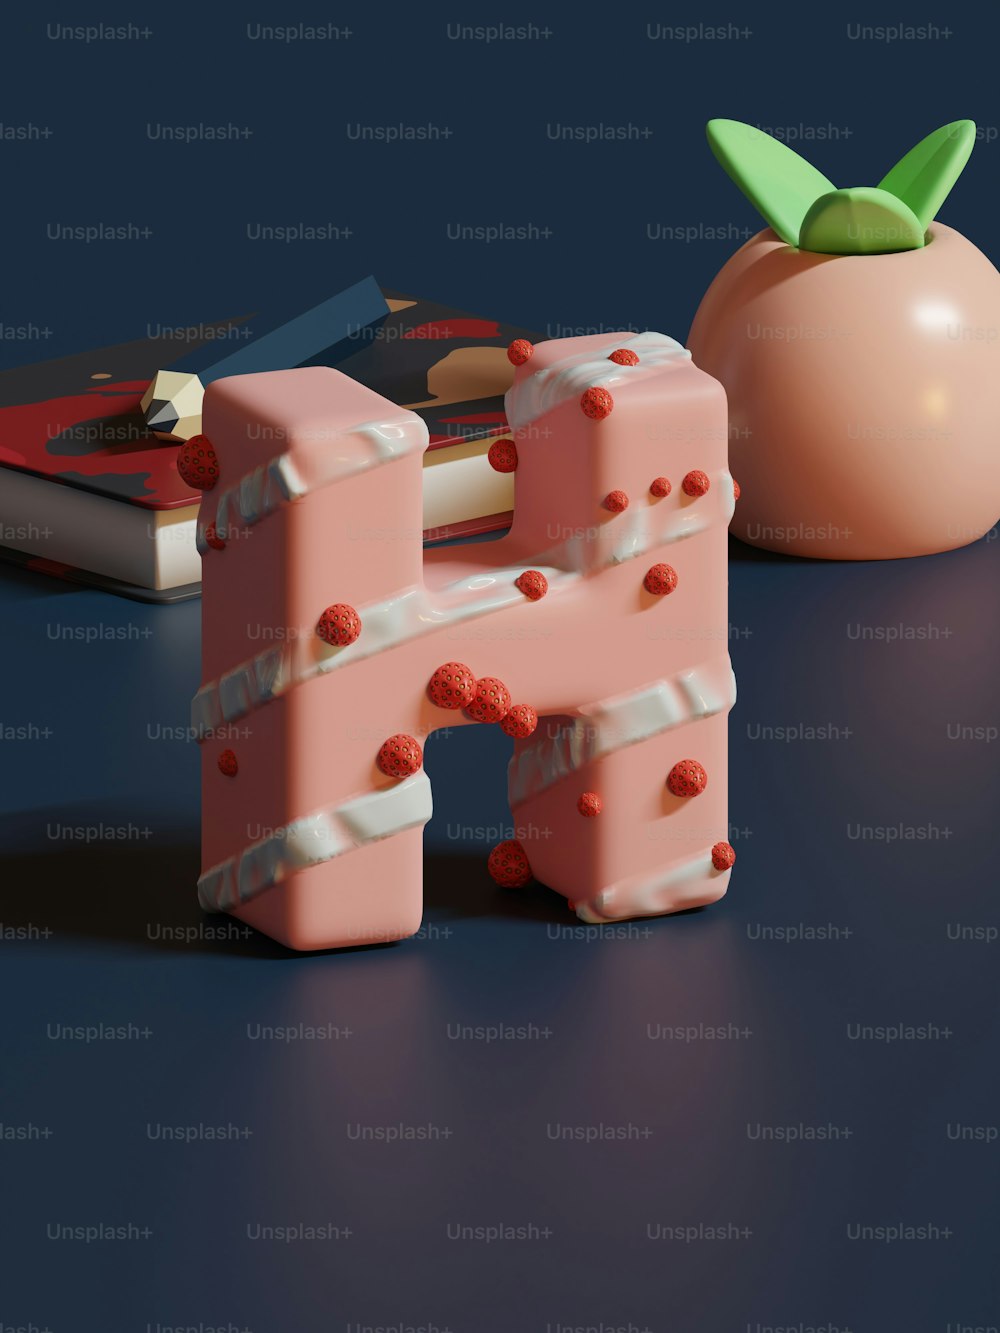 a pink object sitting next to a tomato on a table